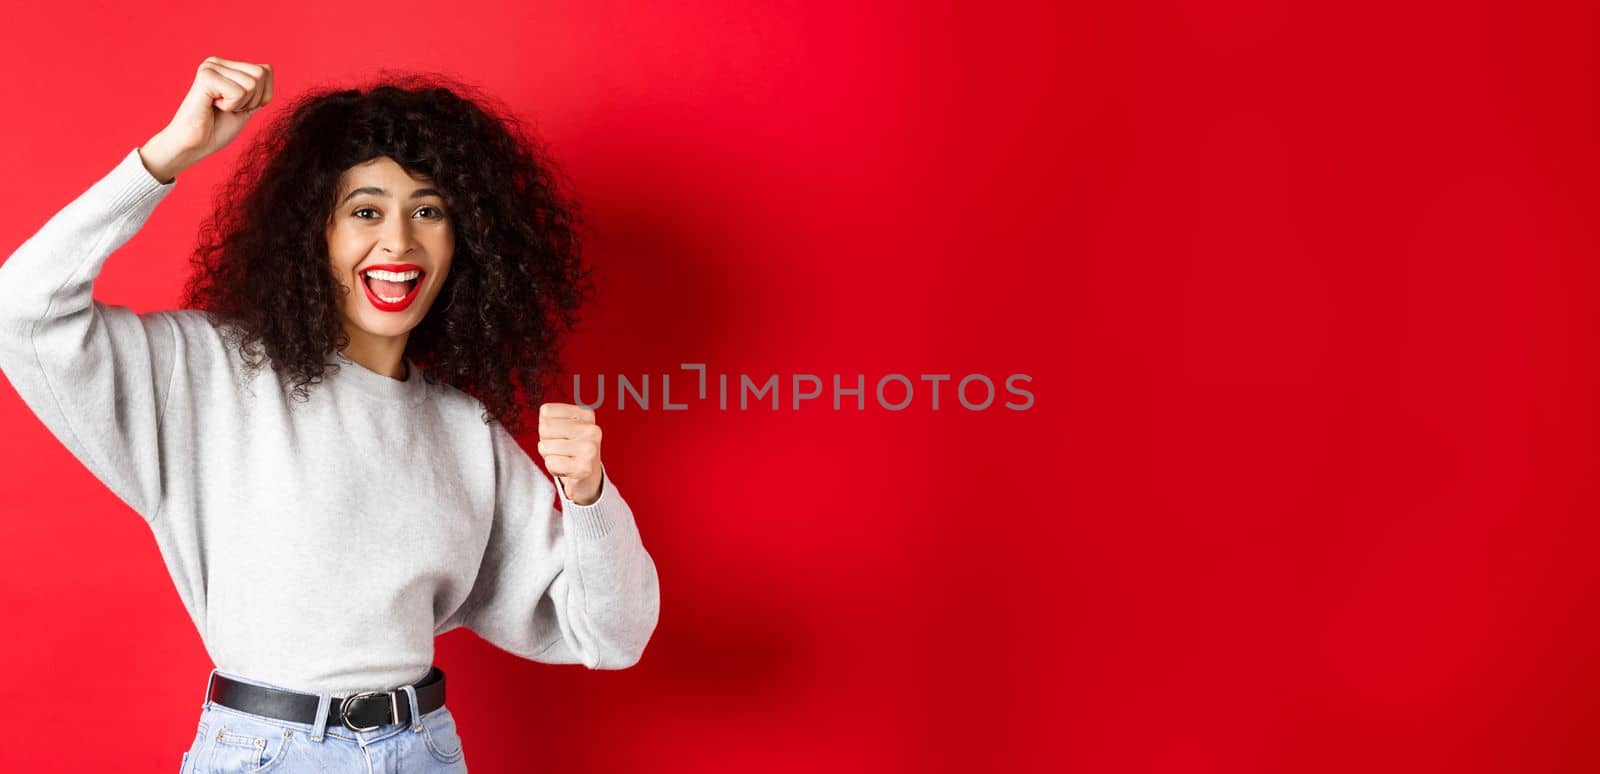 Cheerful young woman with curly hair, raising hand up and celebrating win, achieve goal or success, standing on red background.